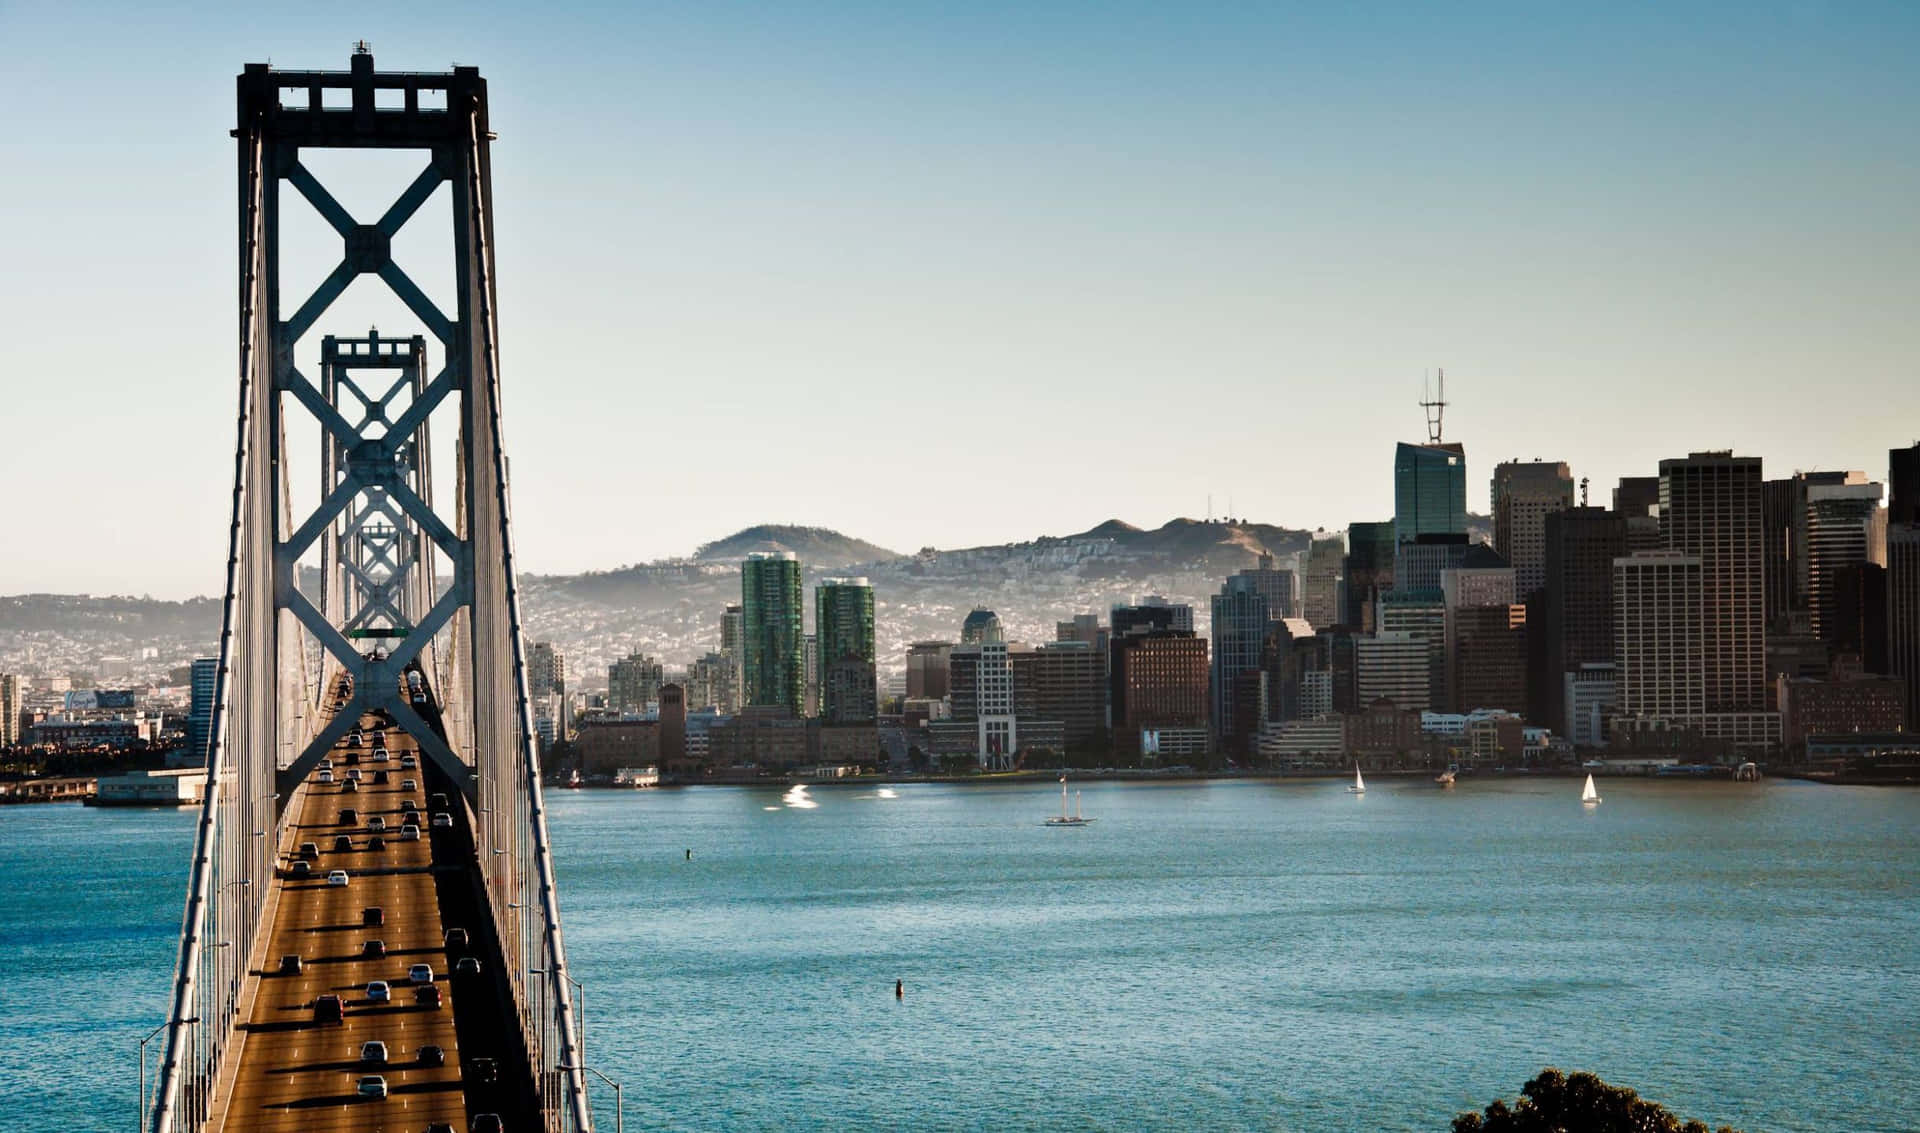 Enjoy the beauty of San Francisco in amazing 2440x1440 resolution